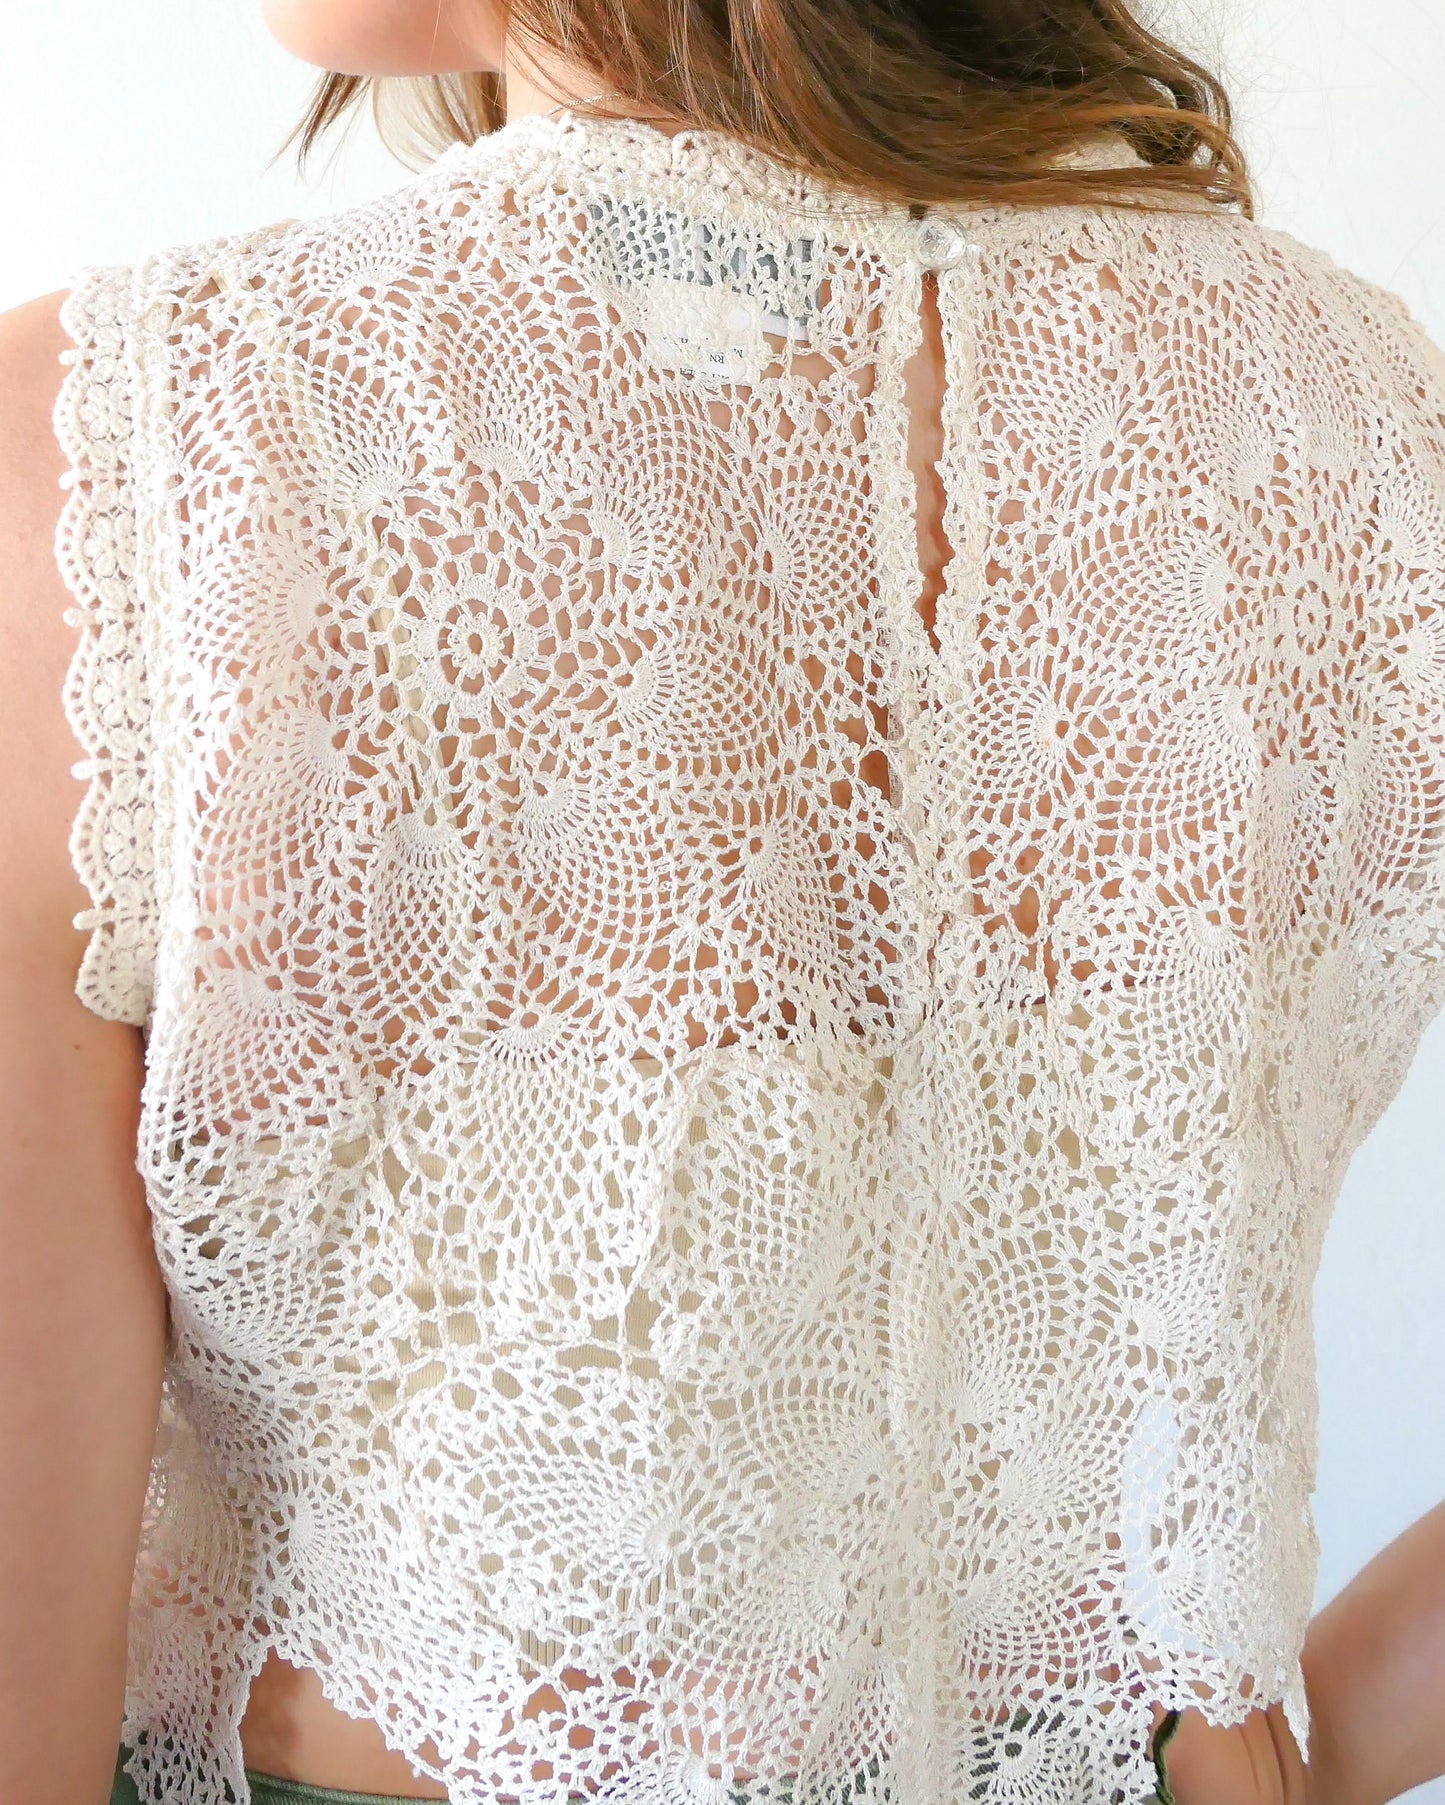 Closeup of back view of top. An ultra casual, hip, and boho-chic crop tank top made with interconnected flower doilies reminiscent of the white lotus, which symbolizes peace, tranquility, and calmness.  Lace trim at the collar and sleeve.  Model is wearing a natural colored crochet top. 